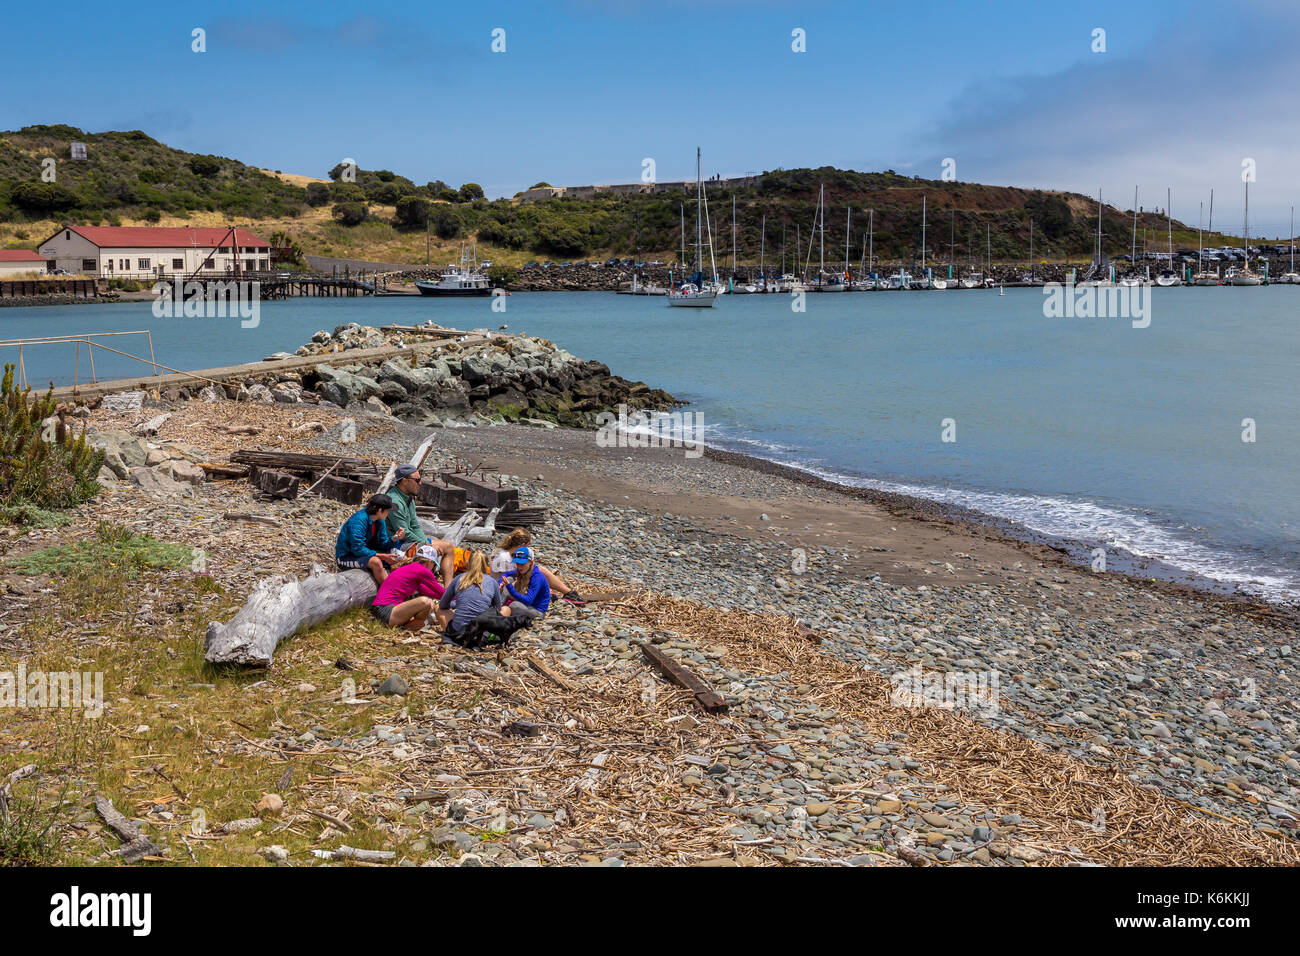 people, family, tourists, visitors, sitting on beach, beach, Fort Baker, city of Sausalito, Sausalito, Marin County, California, United States, North  Stock Photo